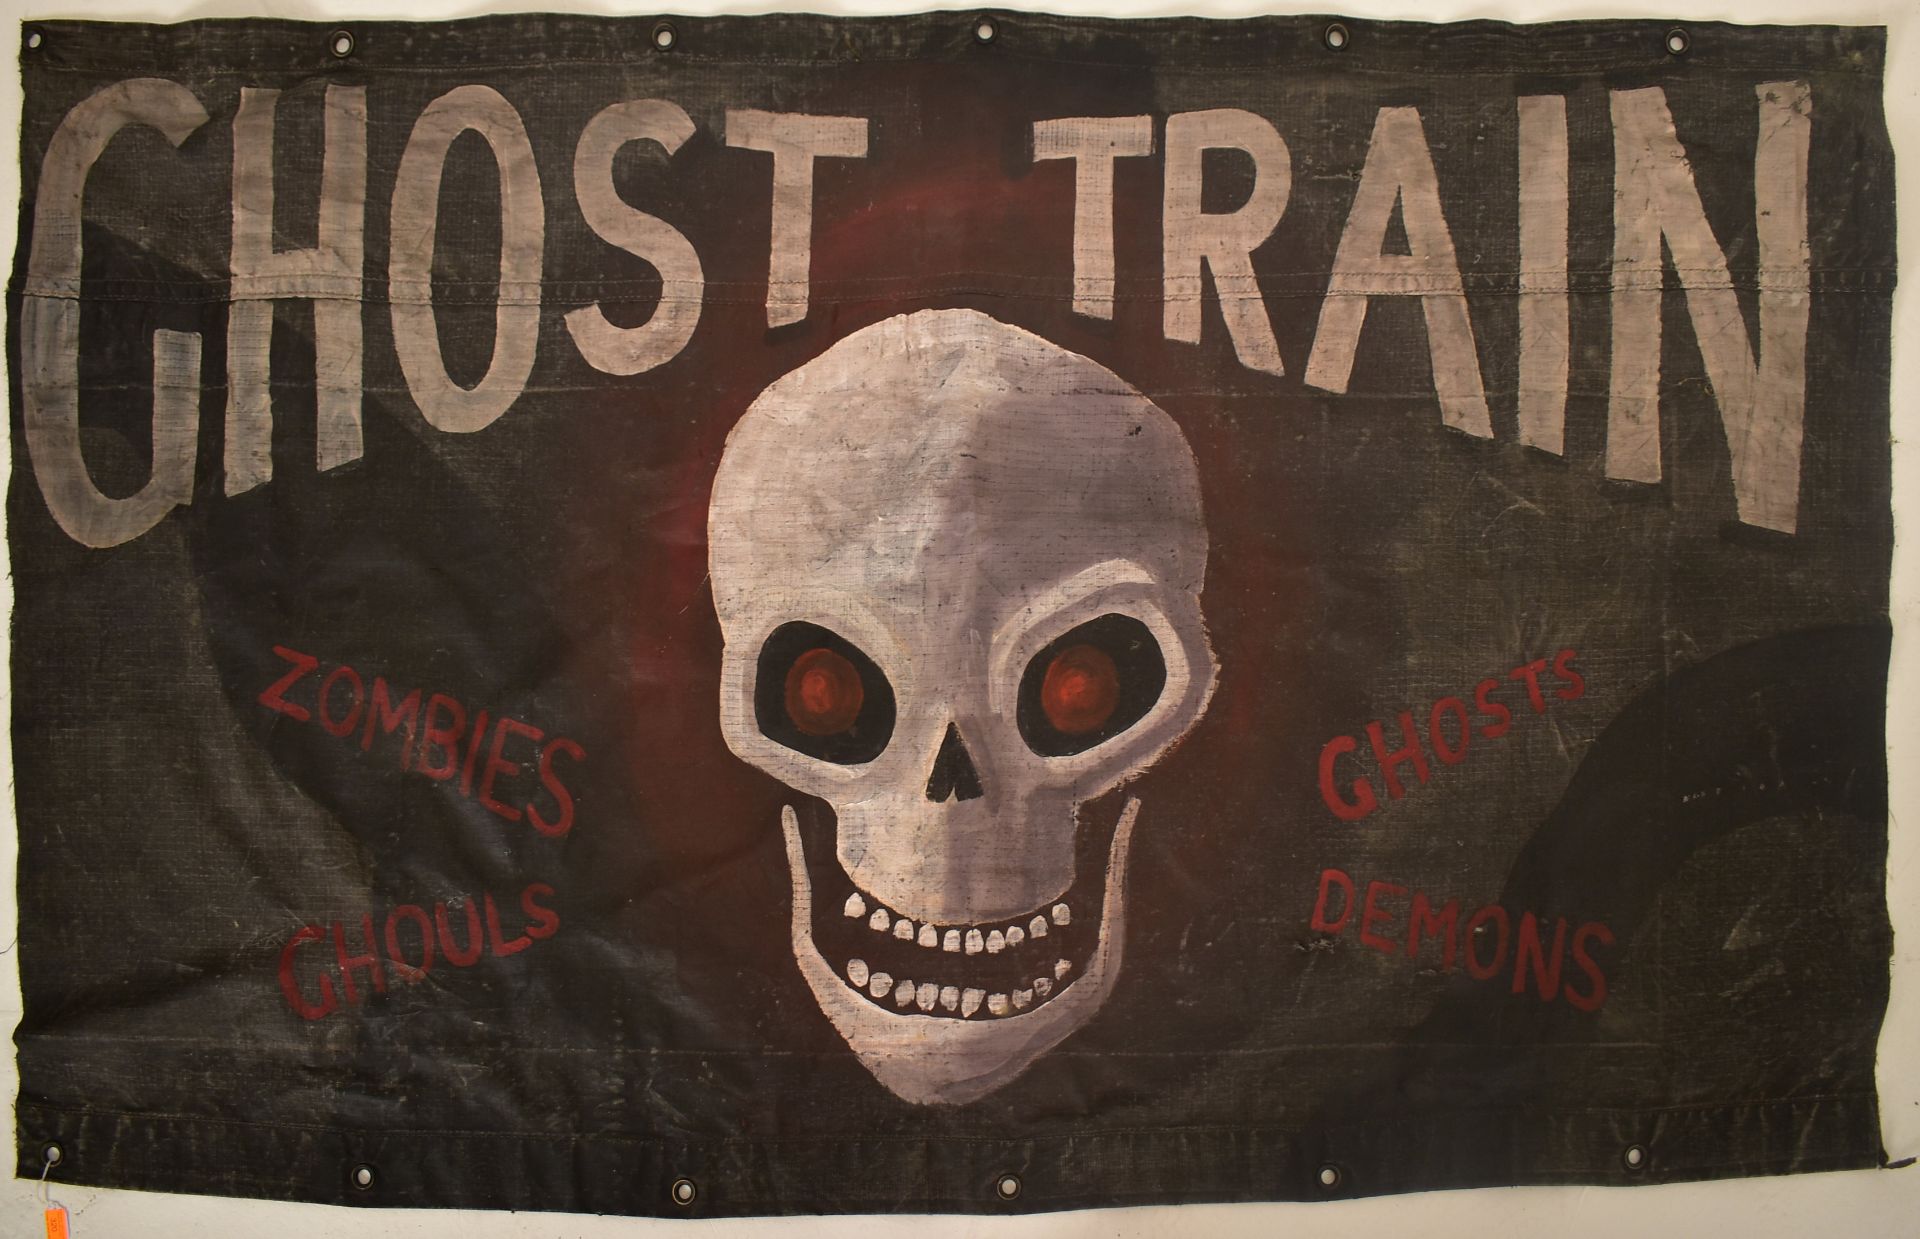 GHOST TRAIN - LARGE PAINTED ON LORRY CANVAS FAIRGROUND SIGN